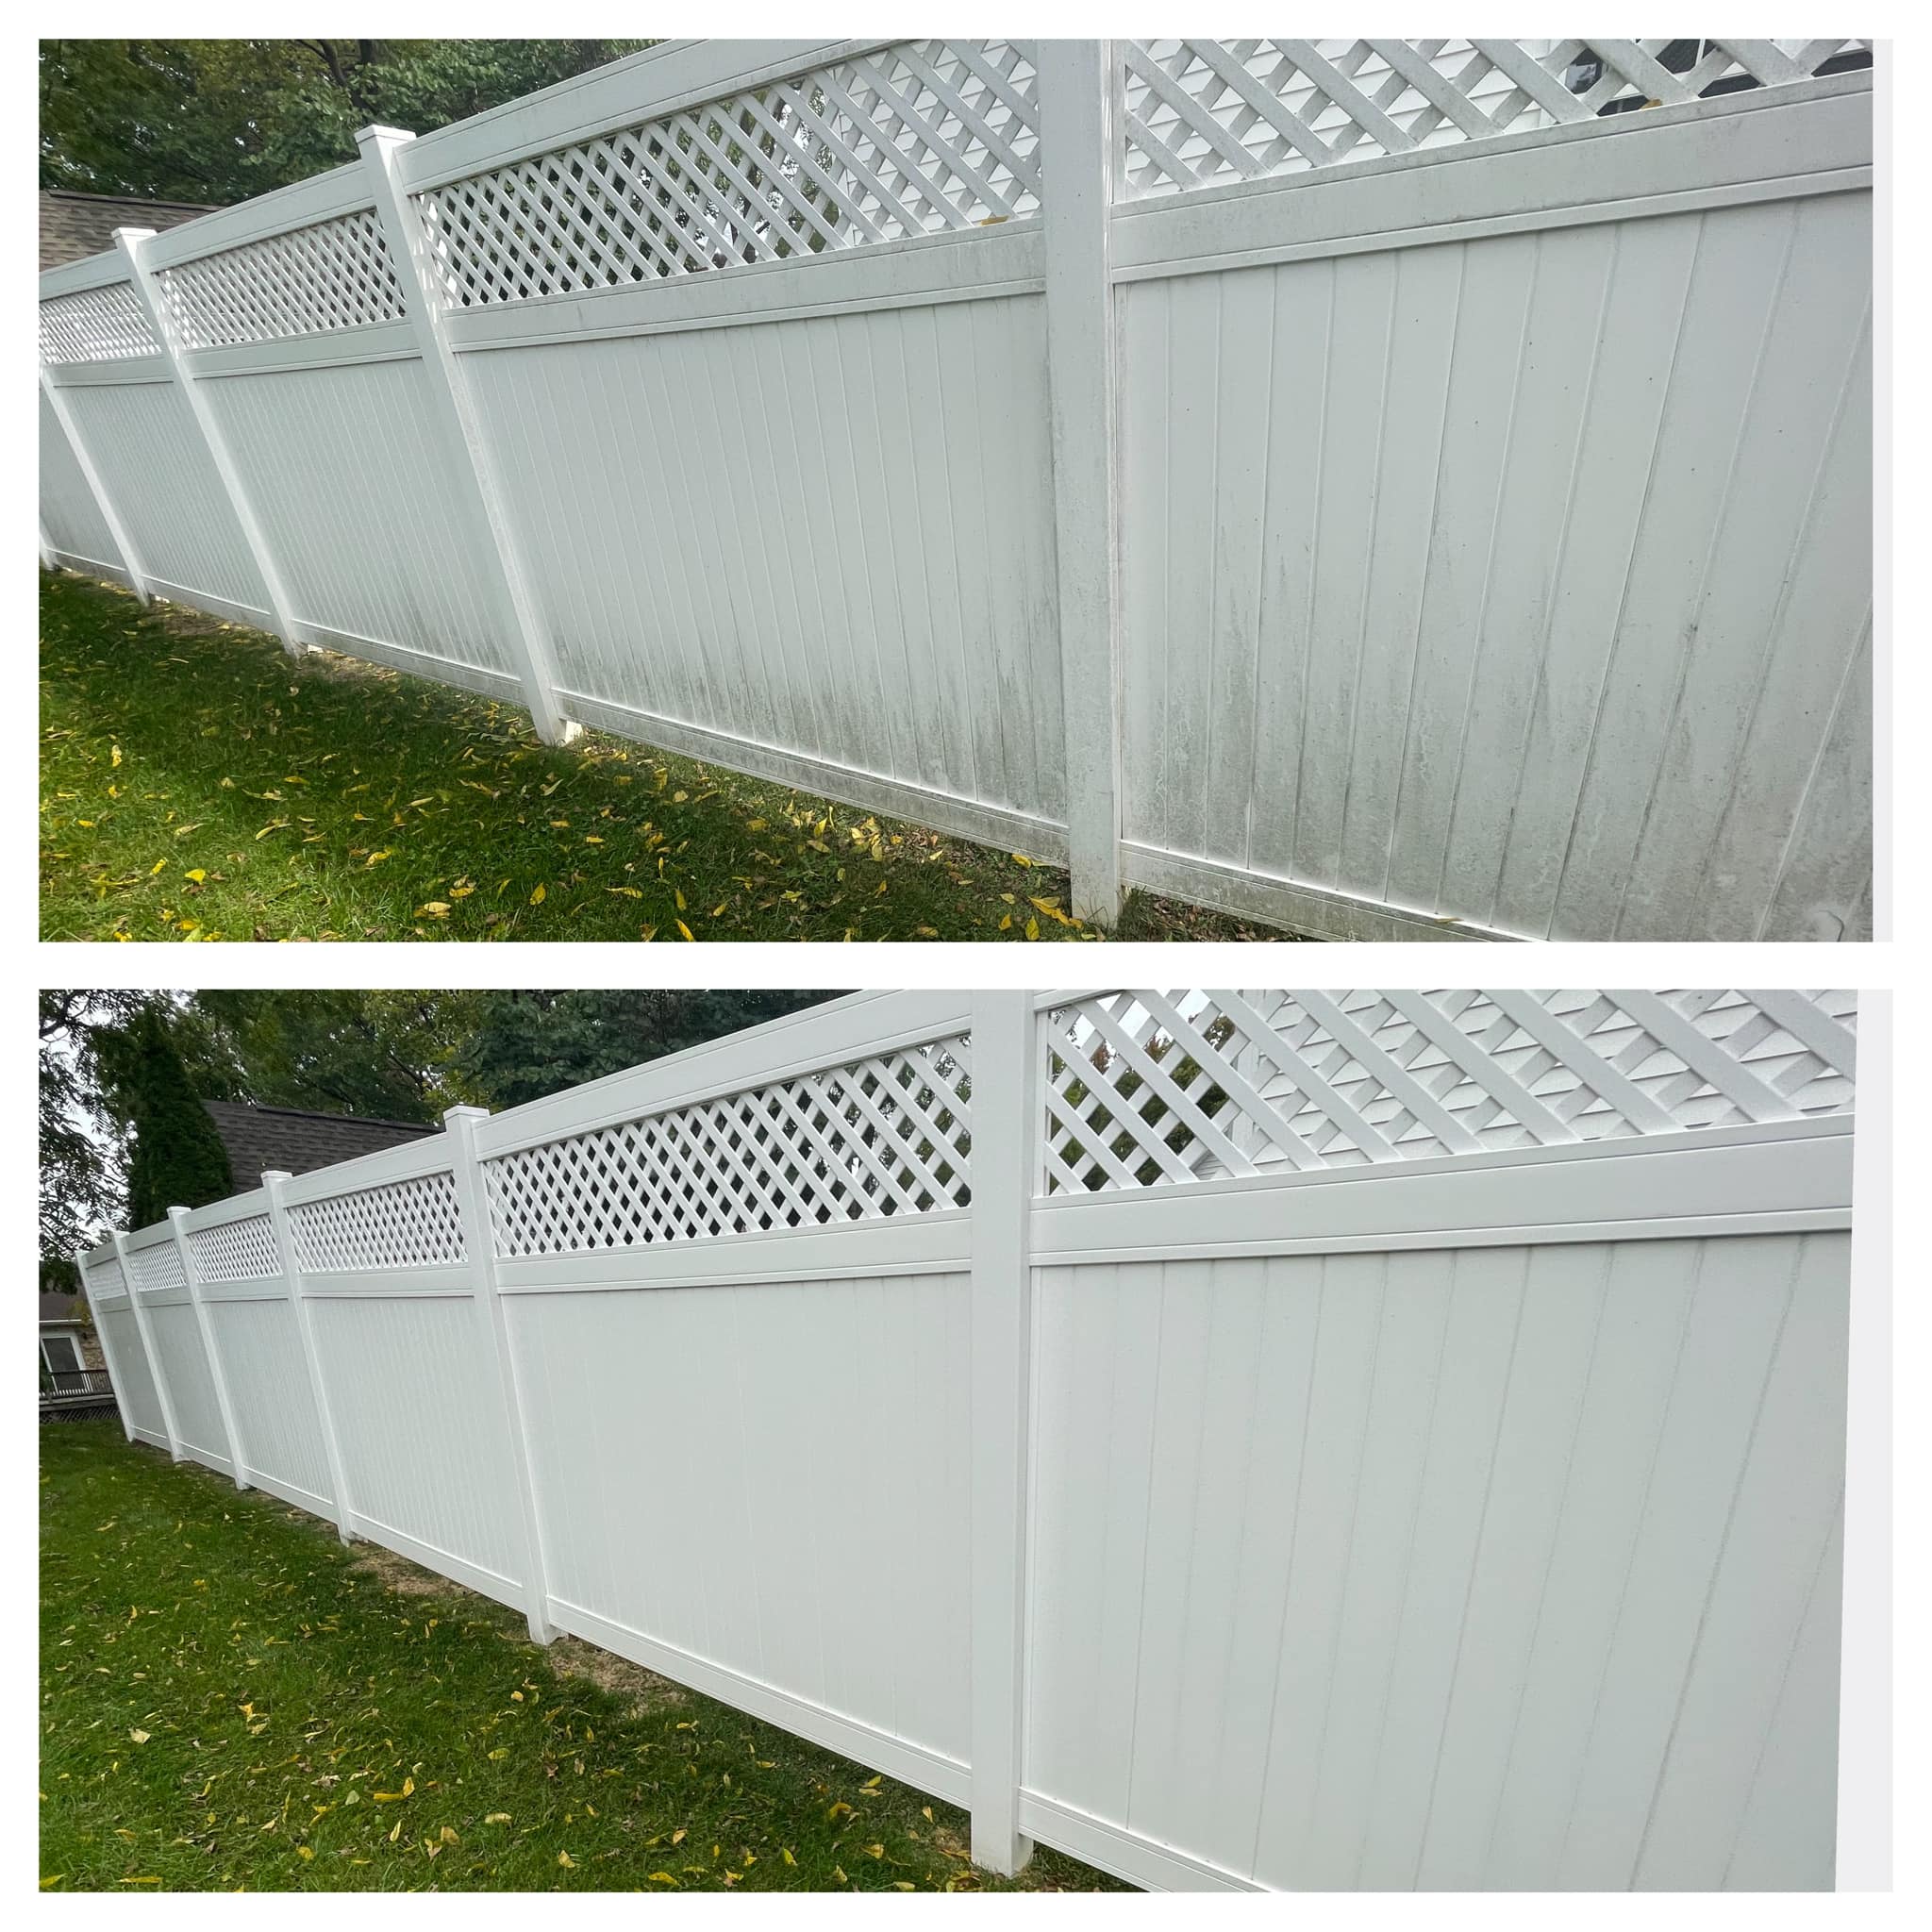 Top Rated Fence pressure washing in Selinsgrove PA by NextGen Power Wash LLC